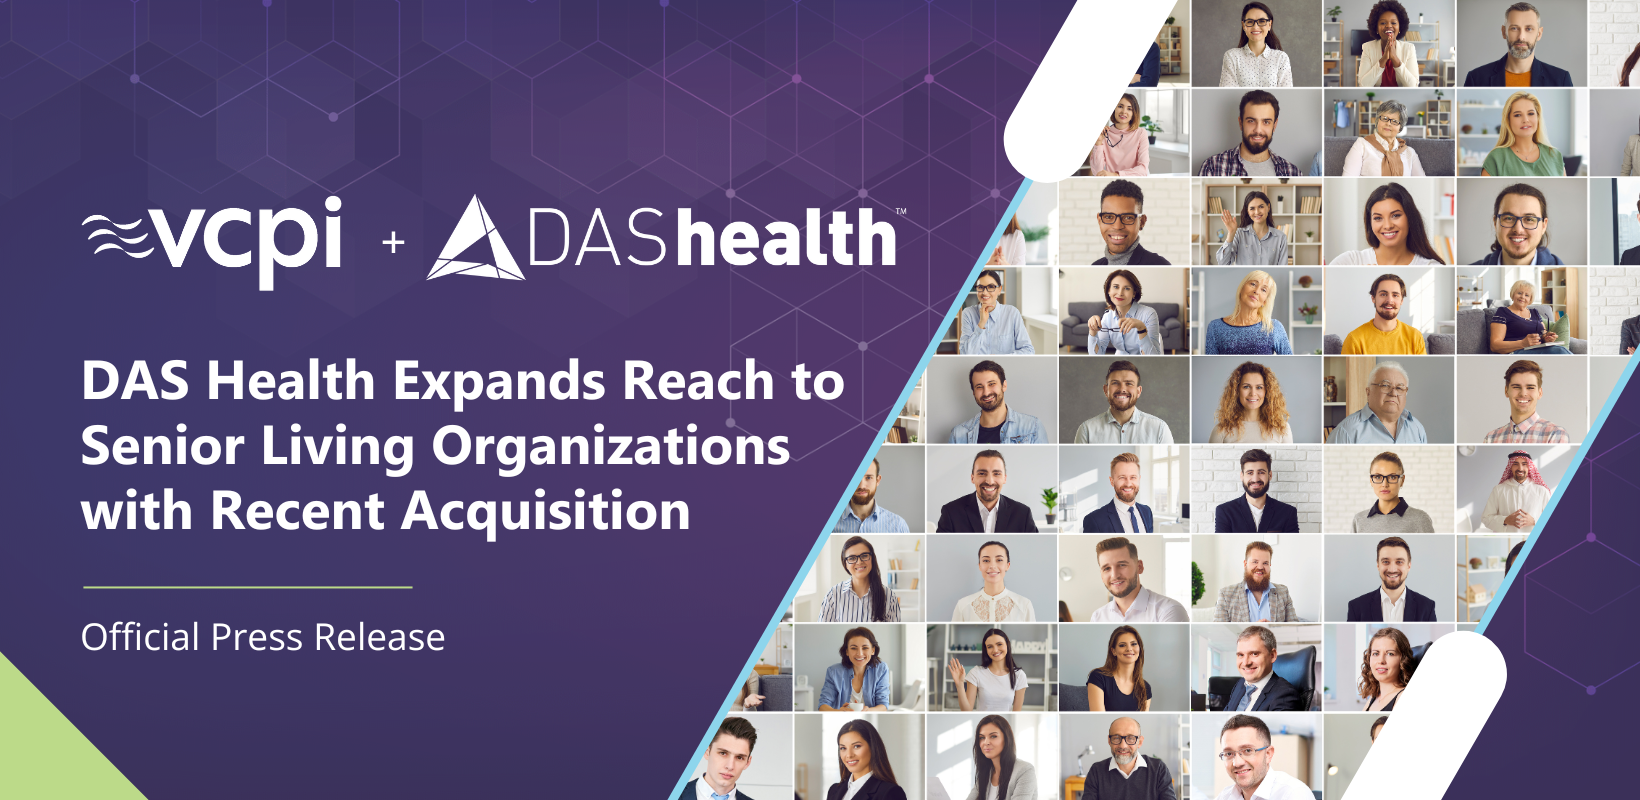 DAS Health Expands Reach to Senior Living Organizations with Recent Acquisition